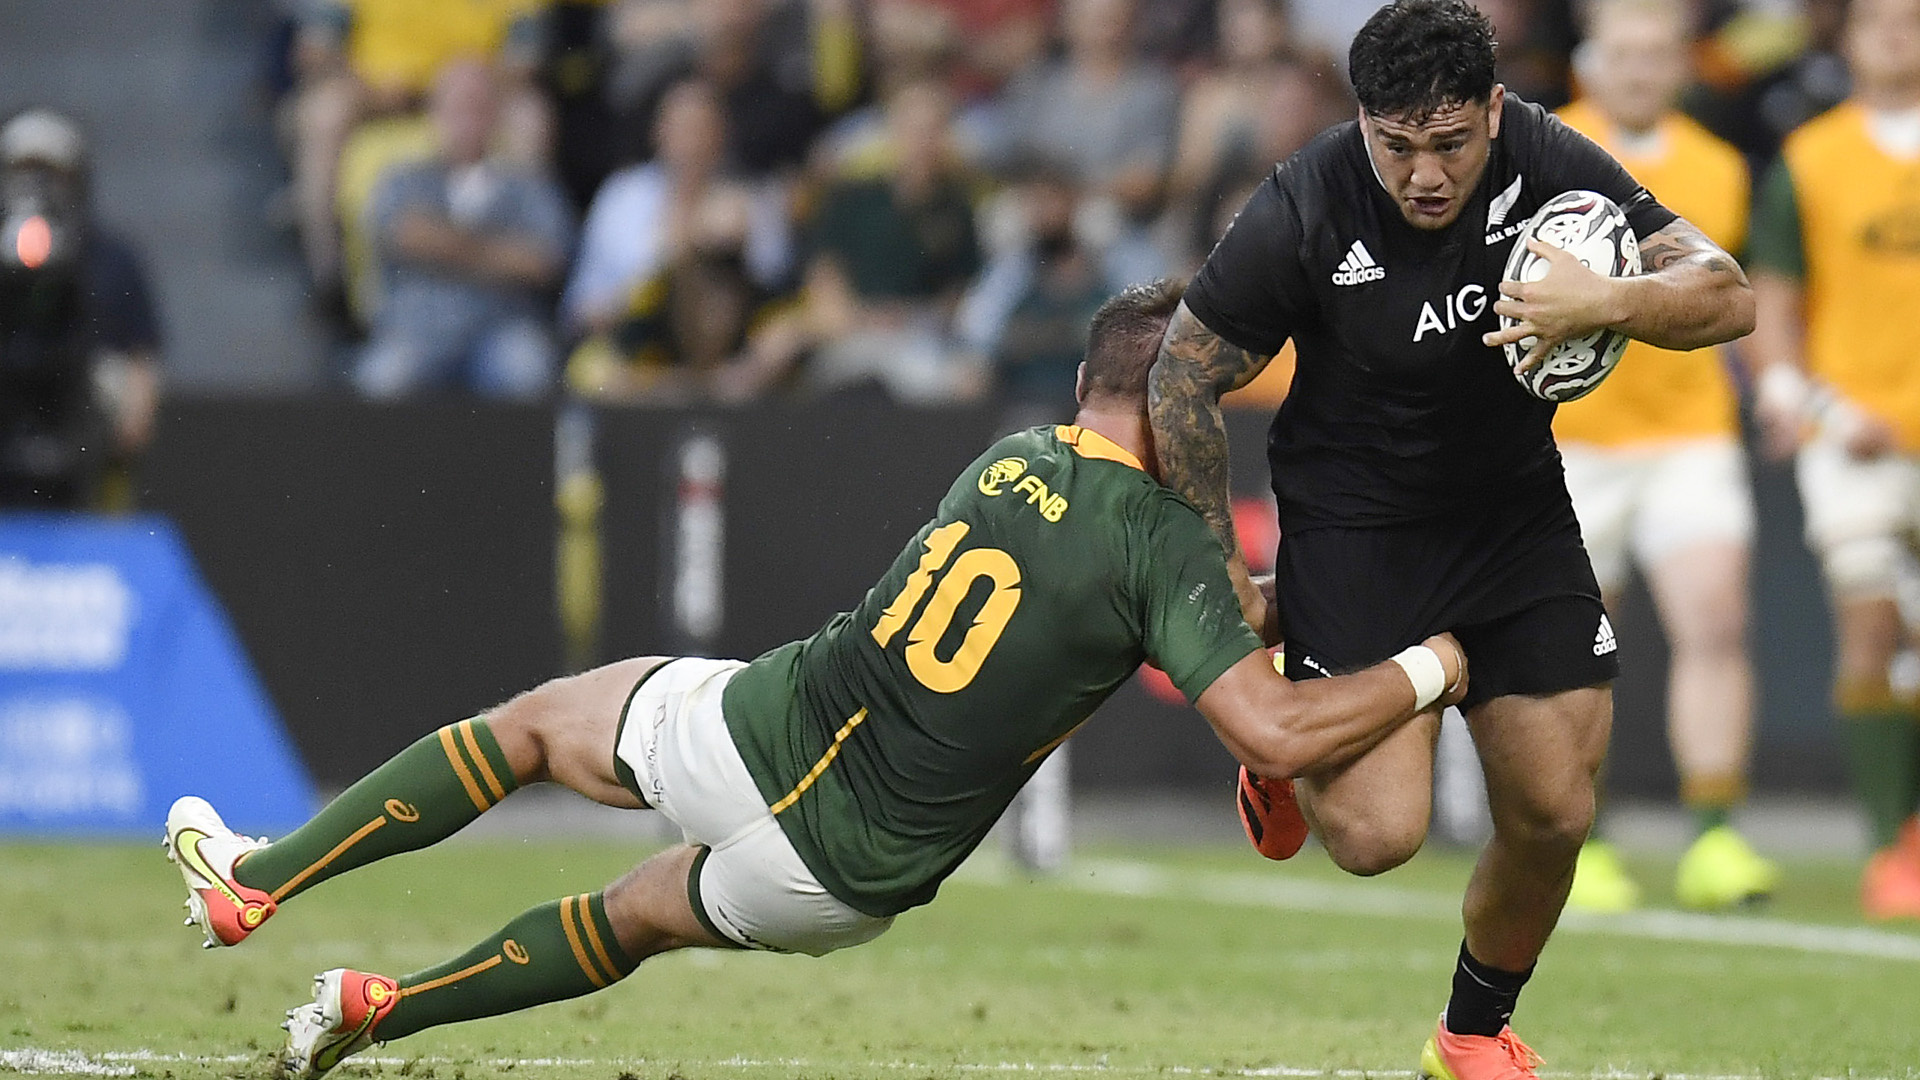 Rugby League: New Zealand's All Blacks vs South Africa's Springboks, The 2021 World Championship. 1920x1080 Full HD Wallpaper.